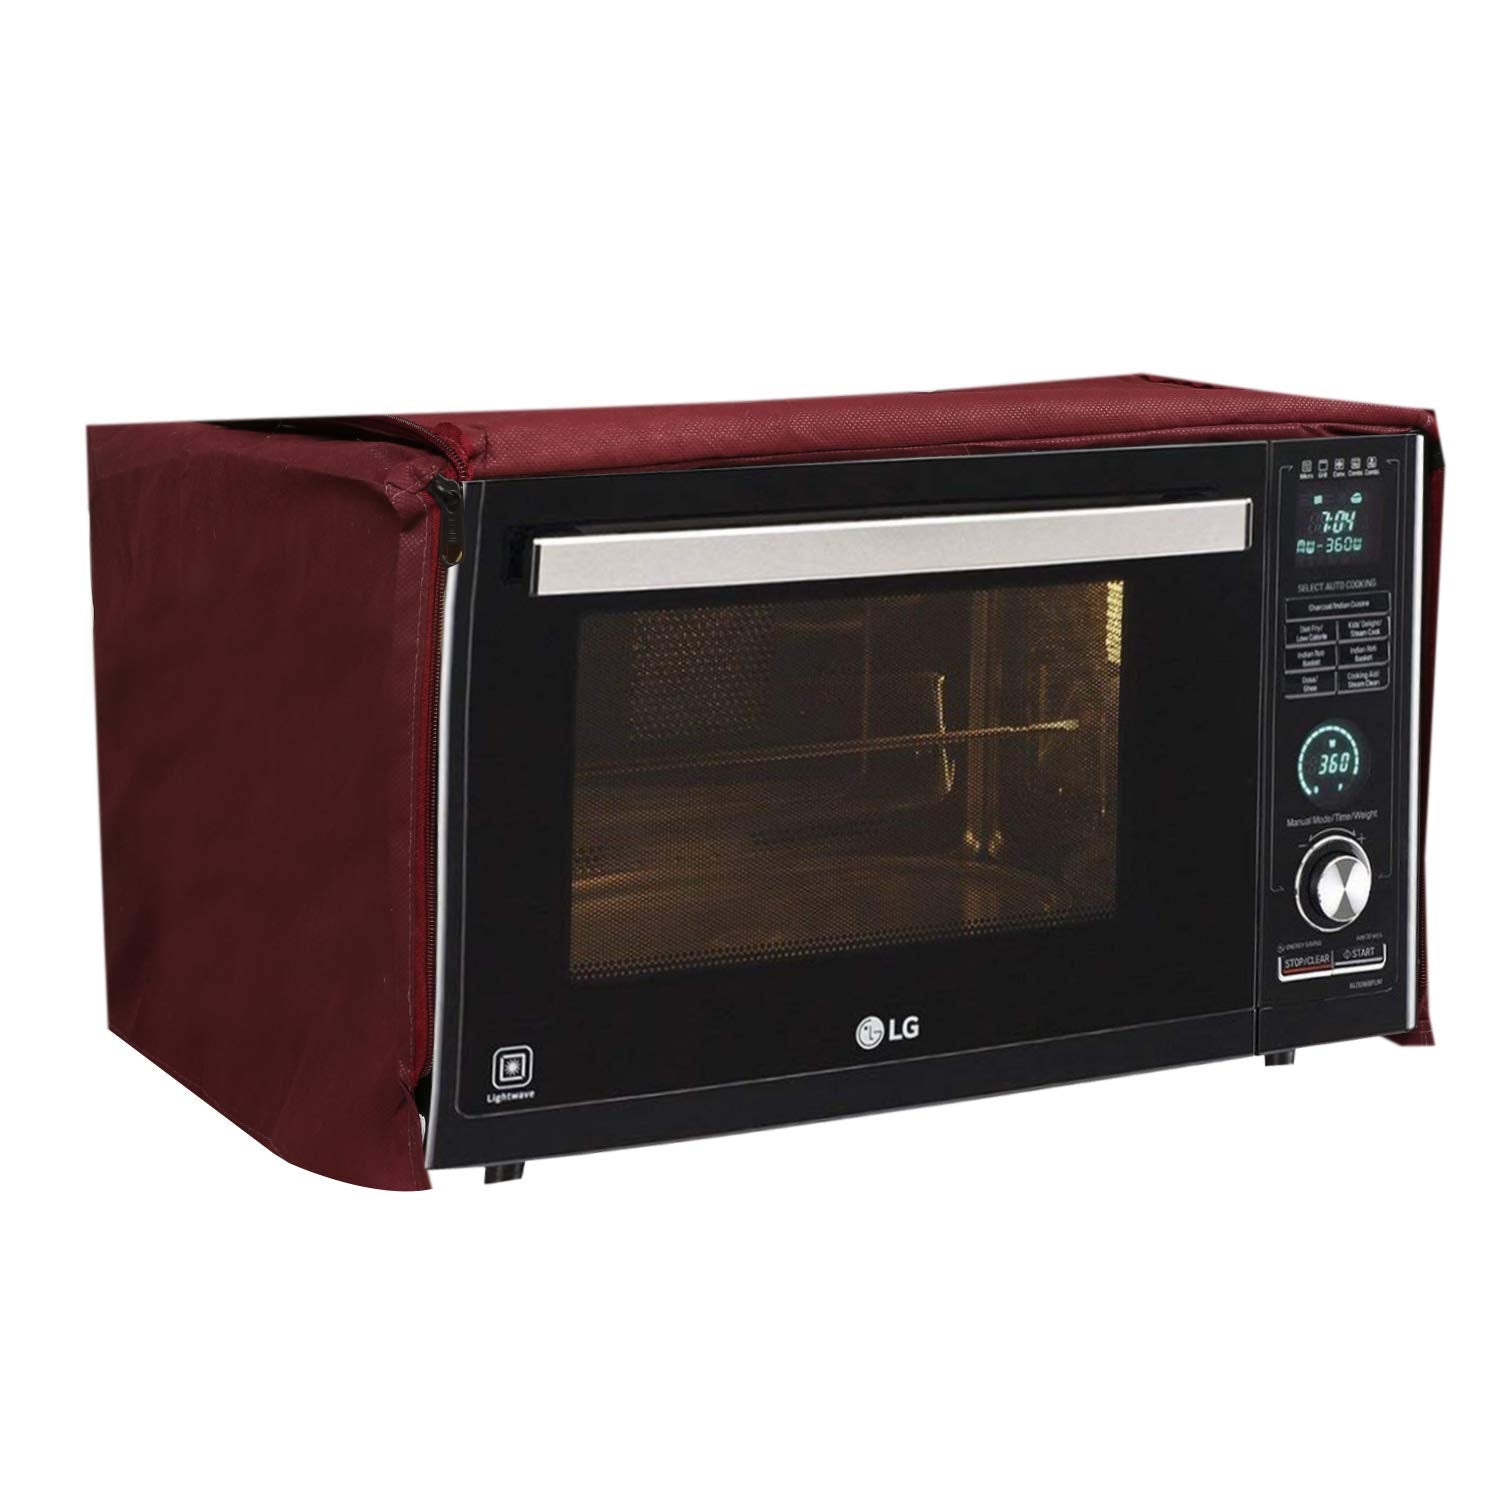 Kuber Industries PVC 1 Piece Microwave Oven Cover 20 LTR (Brown) -CTKTC5713